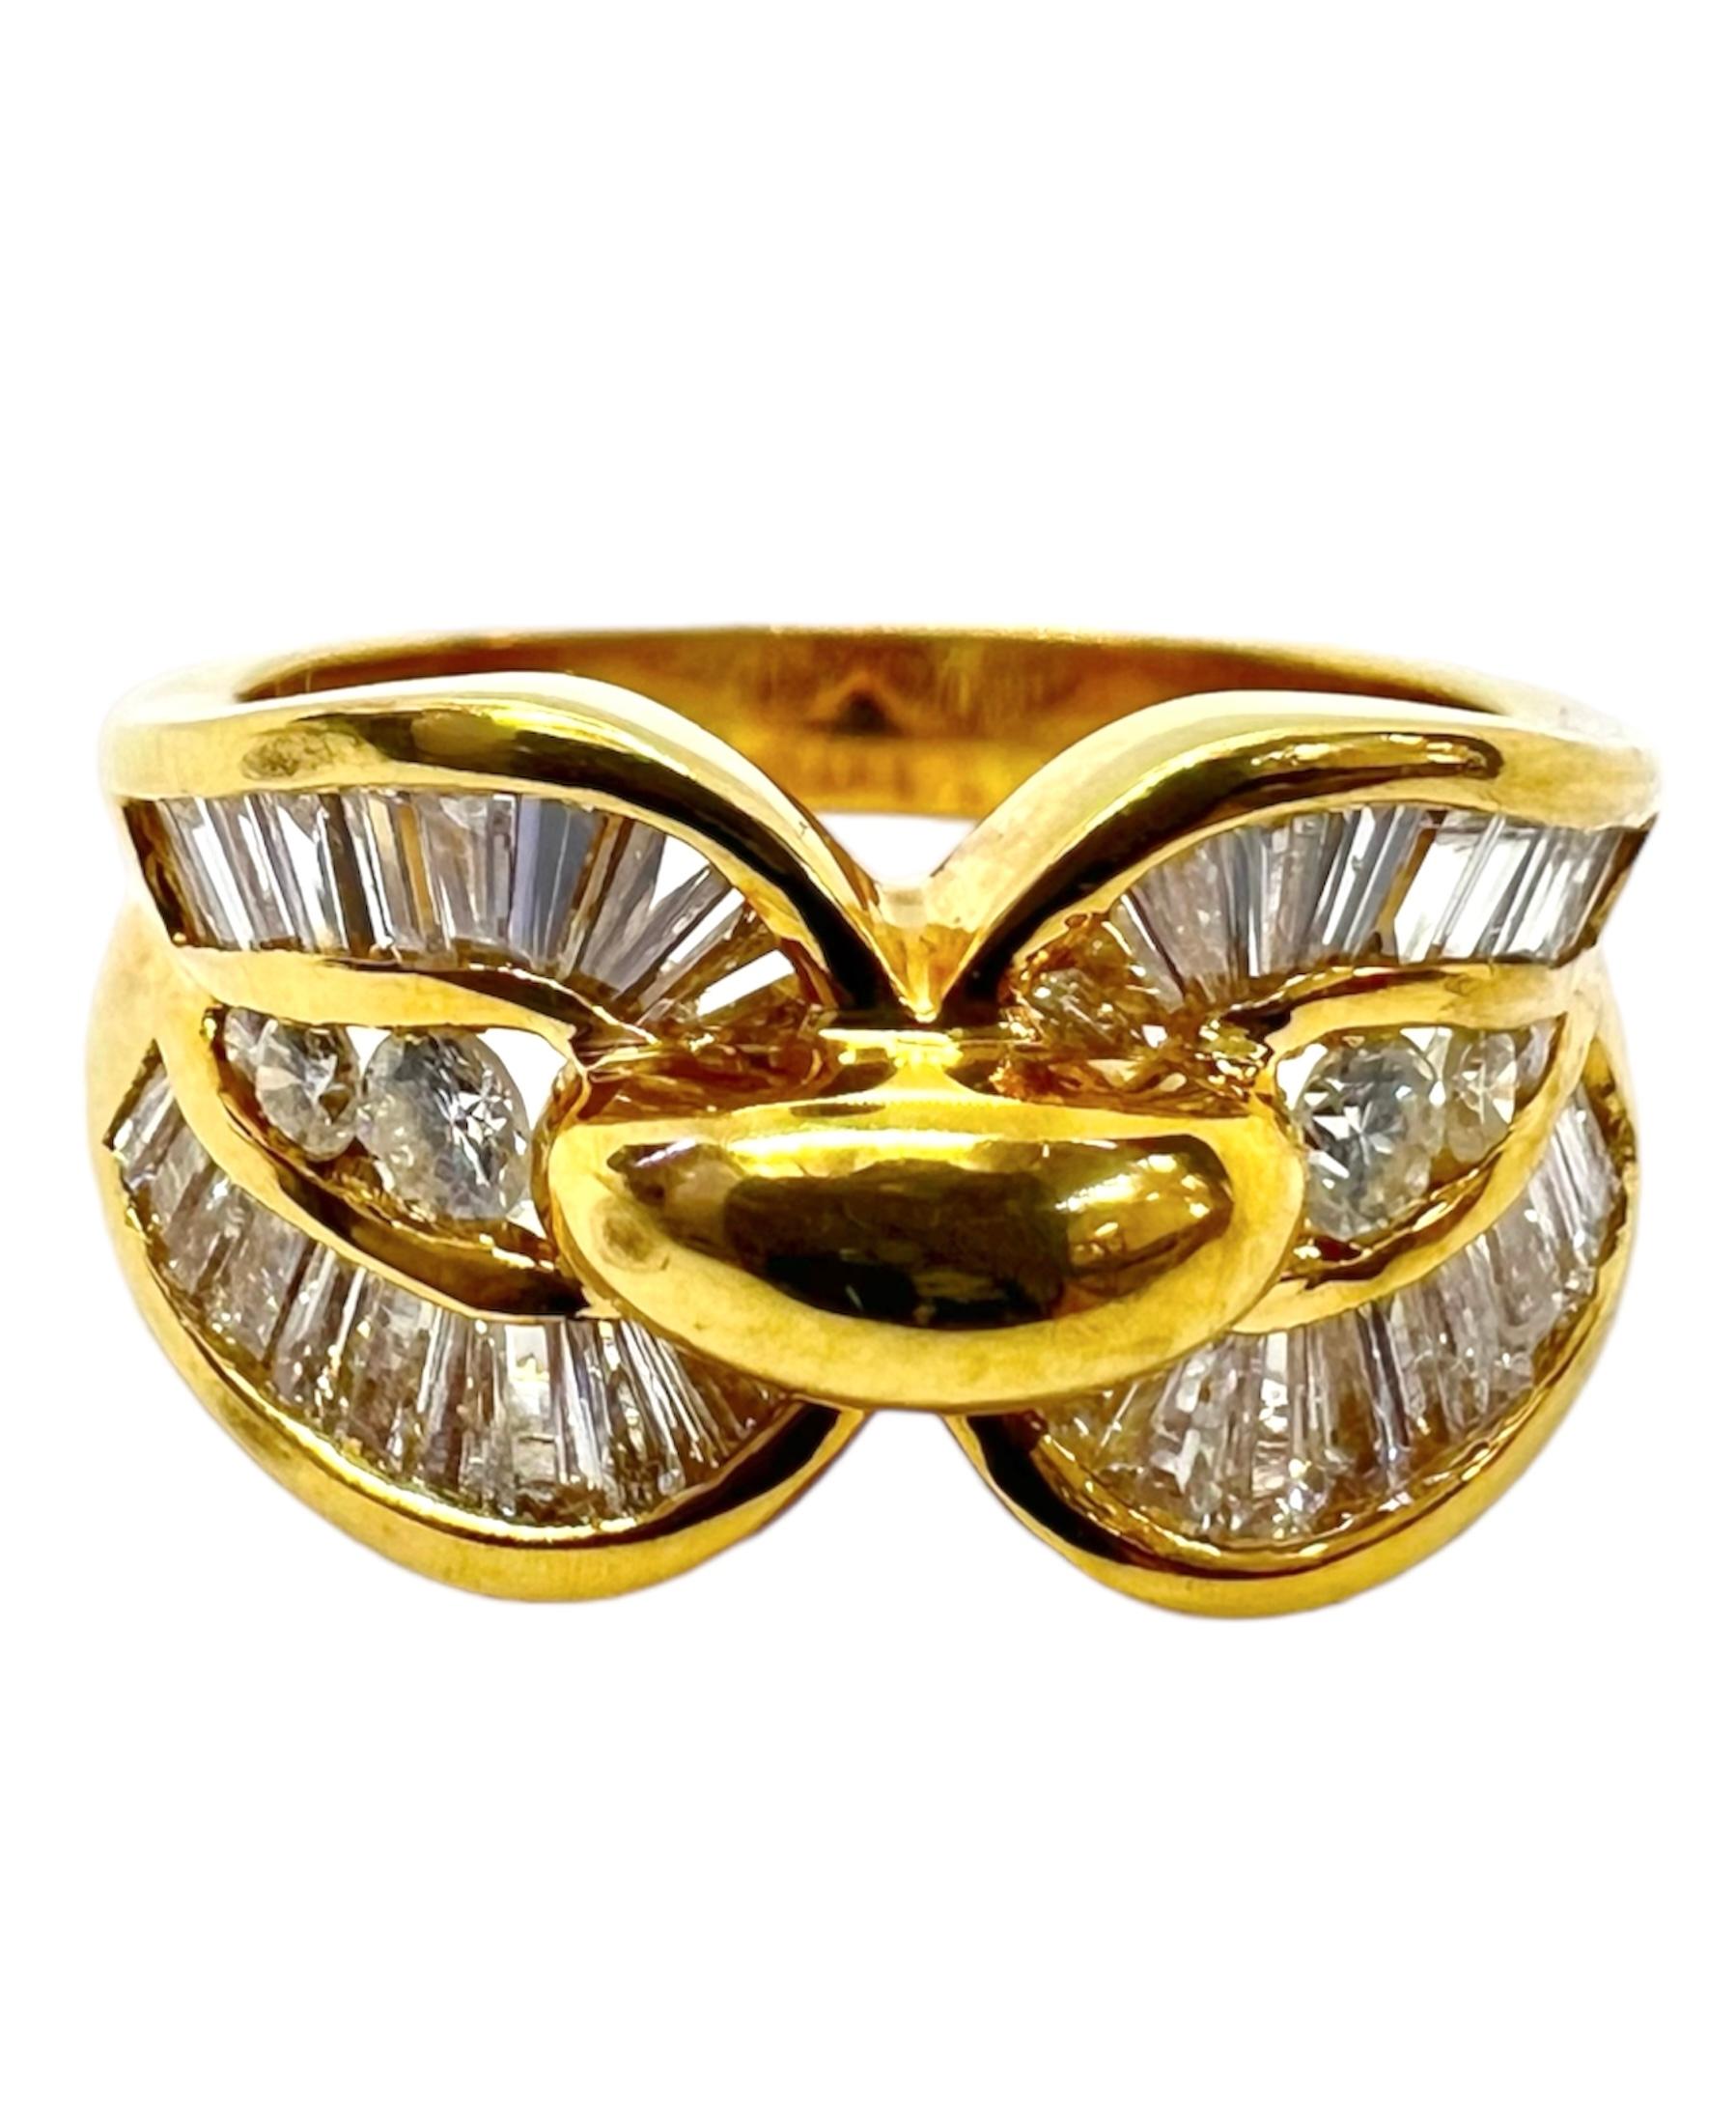 18K yellow gold ring with diamonds.

Sophia D by Joseph Dardashti LTD has been known worldwide for 35 years and are inspired by classic Art Deco design that merges with modern manufacturing techniques.  